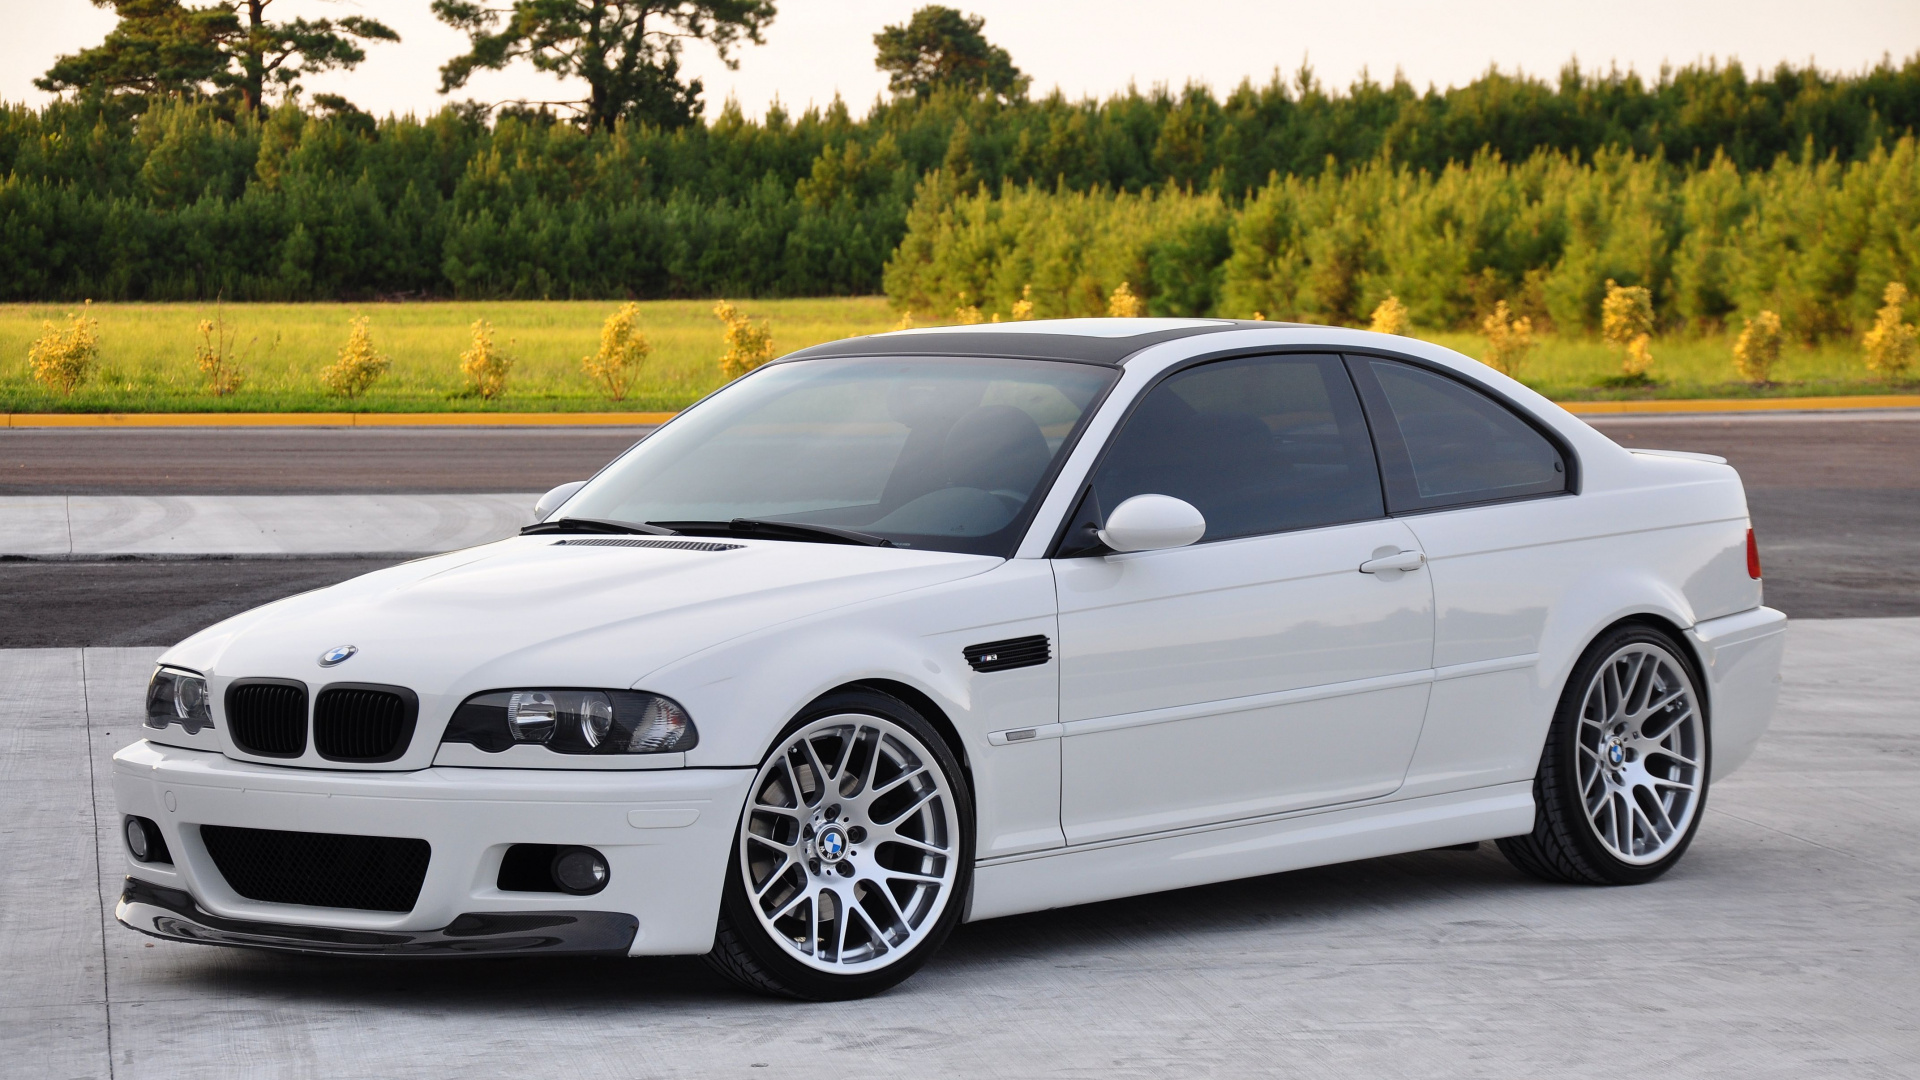 White Bmw m 3 Coupe on Road During Daytime. Wallpaper in 1920x1080 Resolution